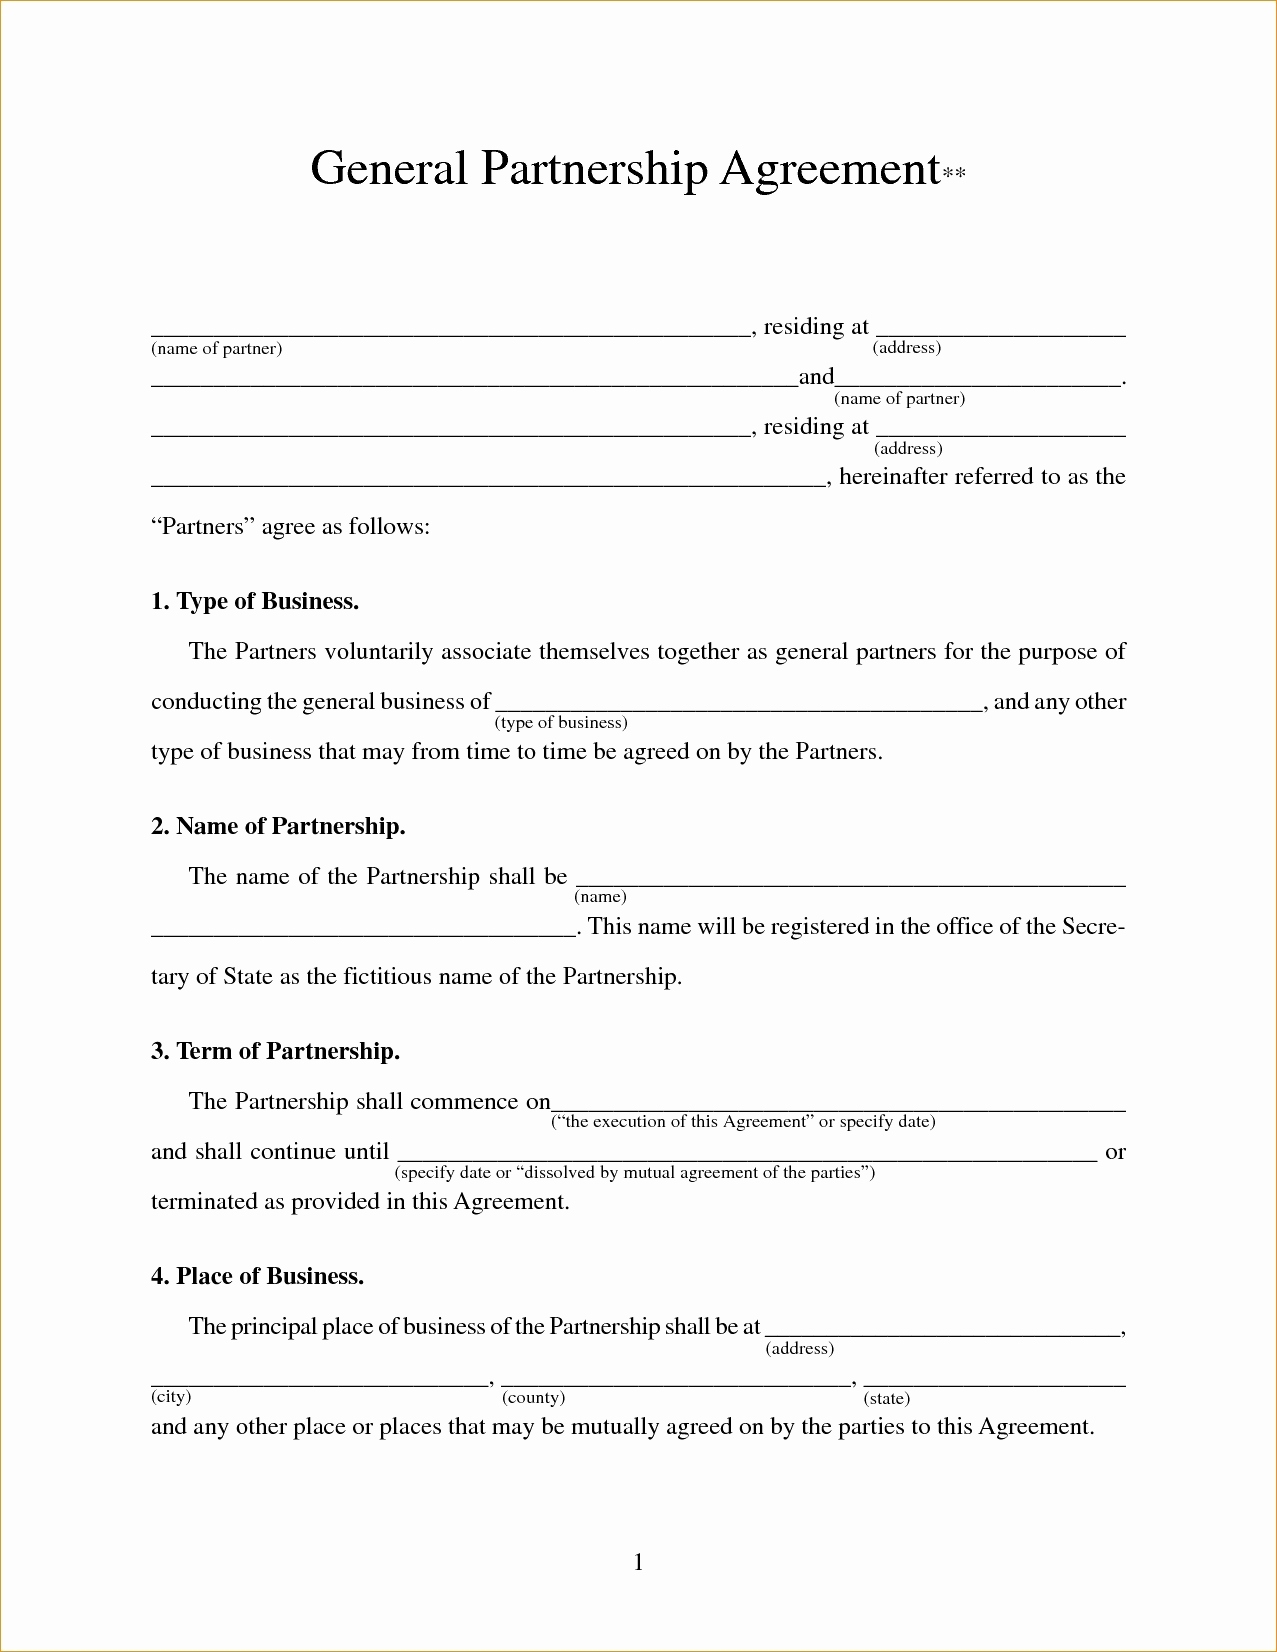 Partnership Agreement Pdf Download 004 Business Partnership Agreement Template Contract Beautiful Ideas